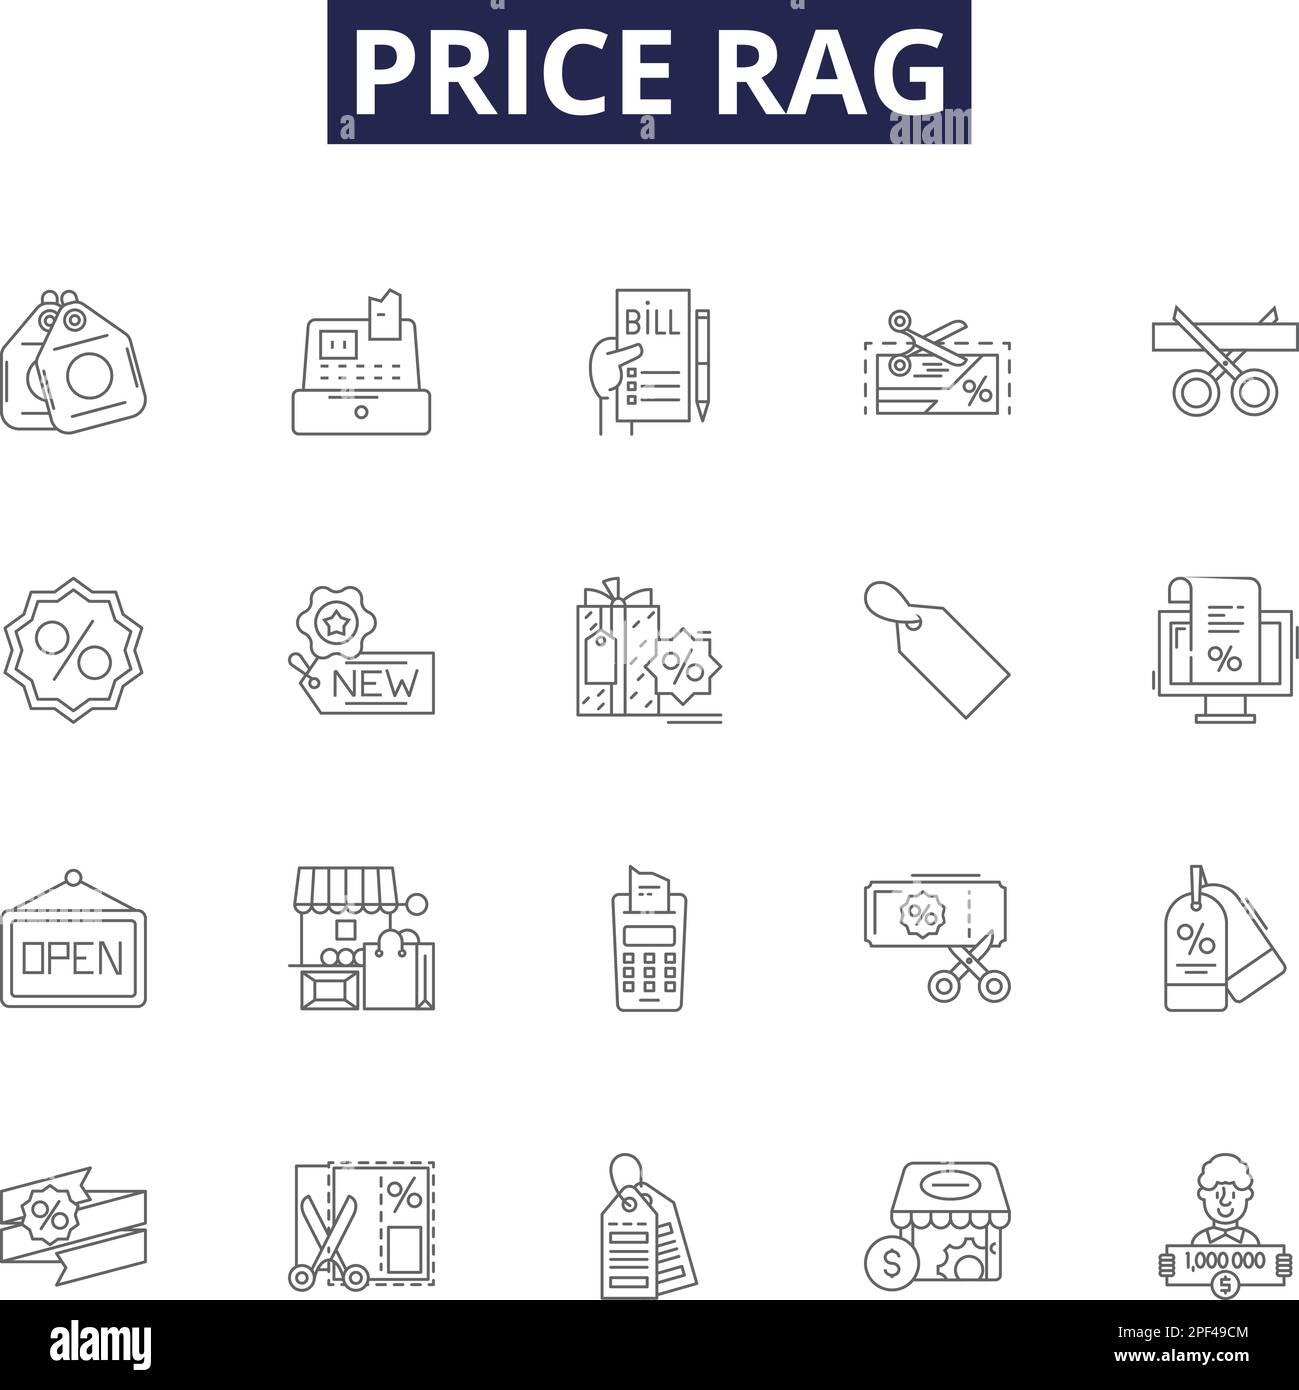 Price rag line vector icons and signs. Cut, Reduce, Decrease, Discount, Cheap, Bargain, Low,Affordable outline vector illustration set Stock Vector